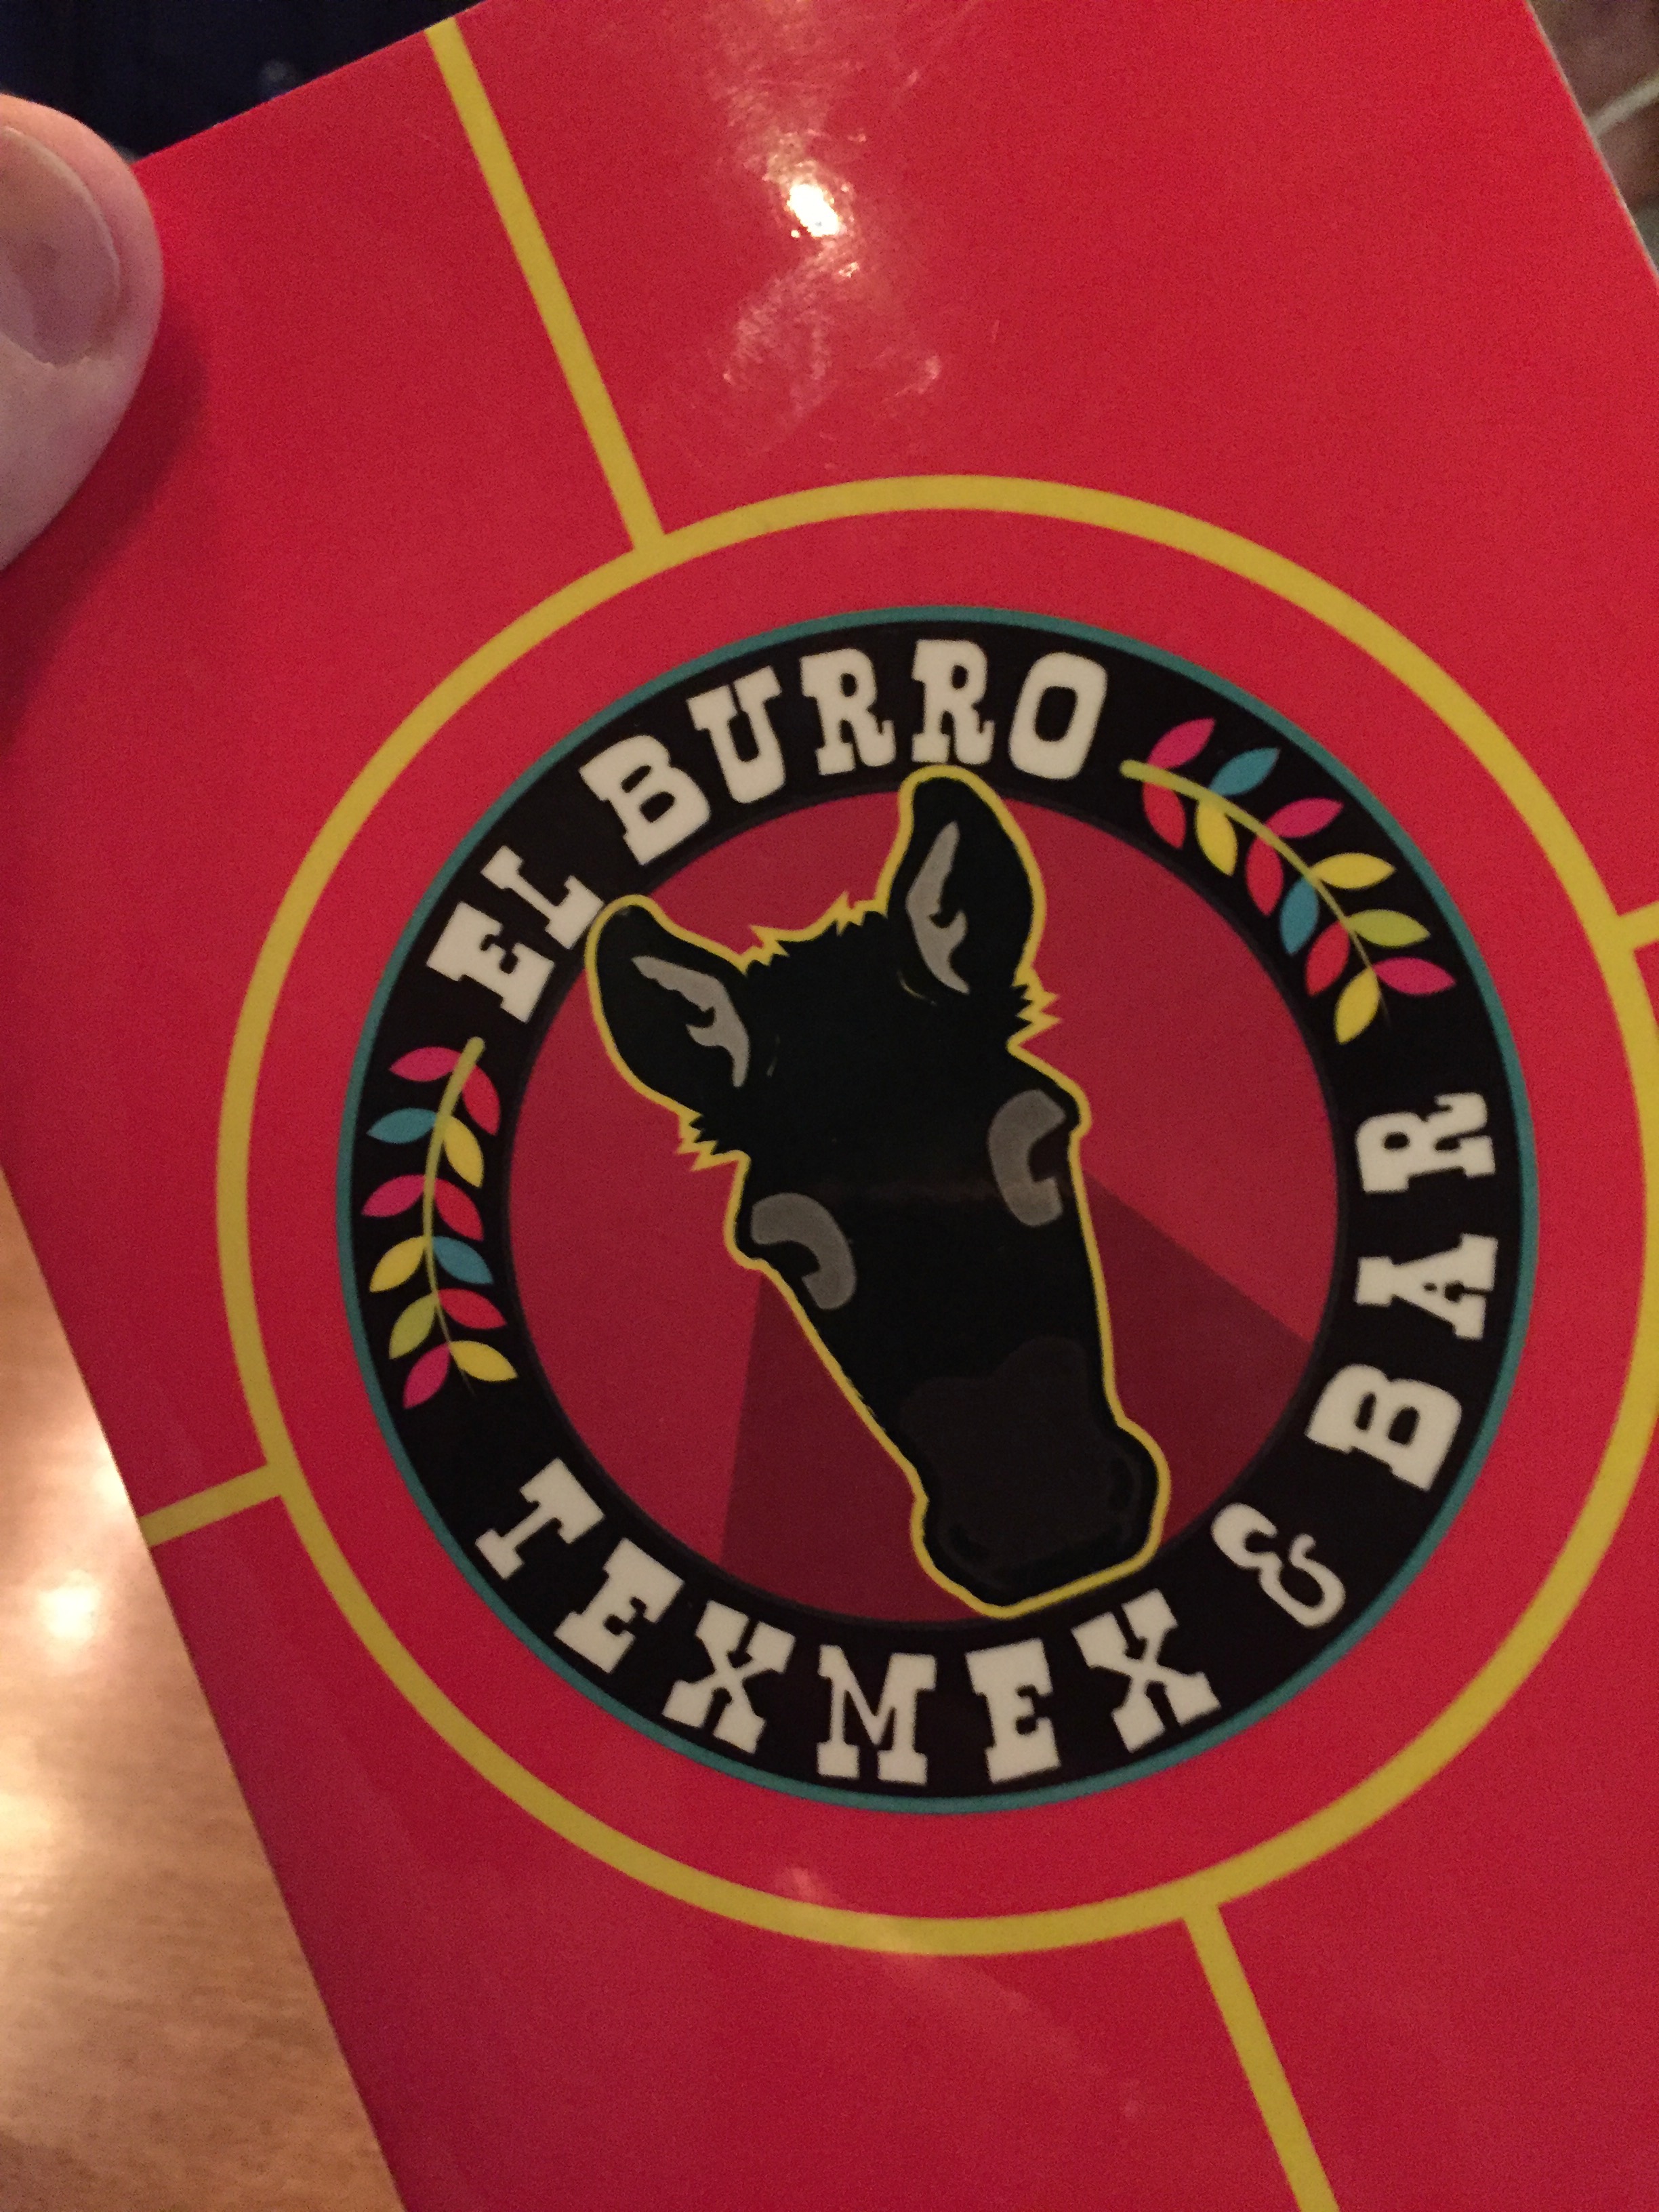 A Changing SOLA: Welcome “EL Burro”